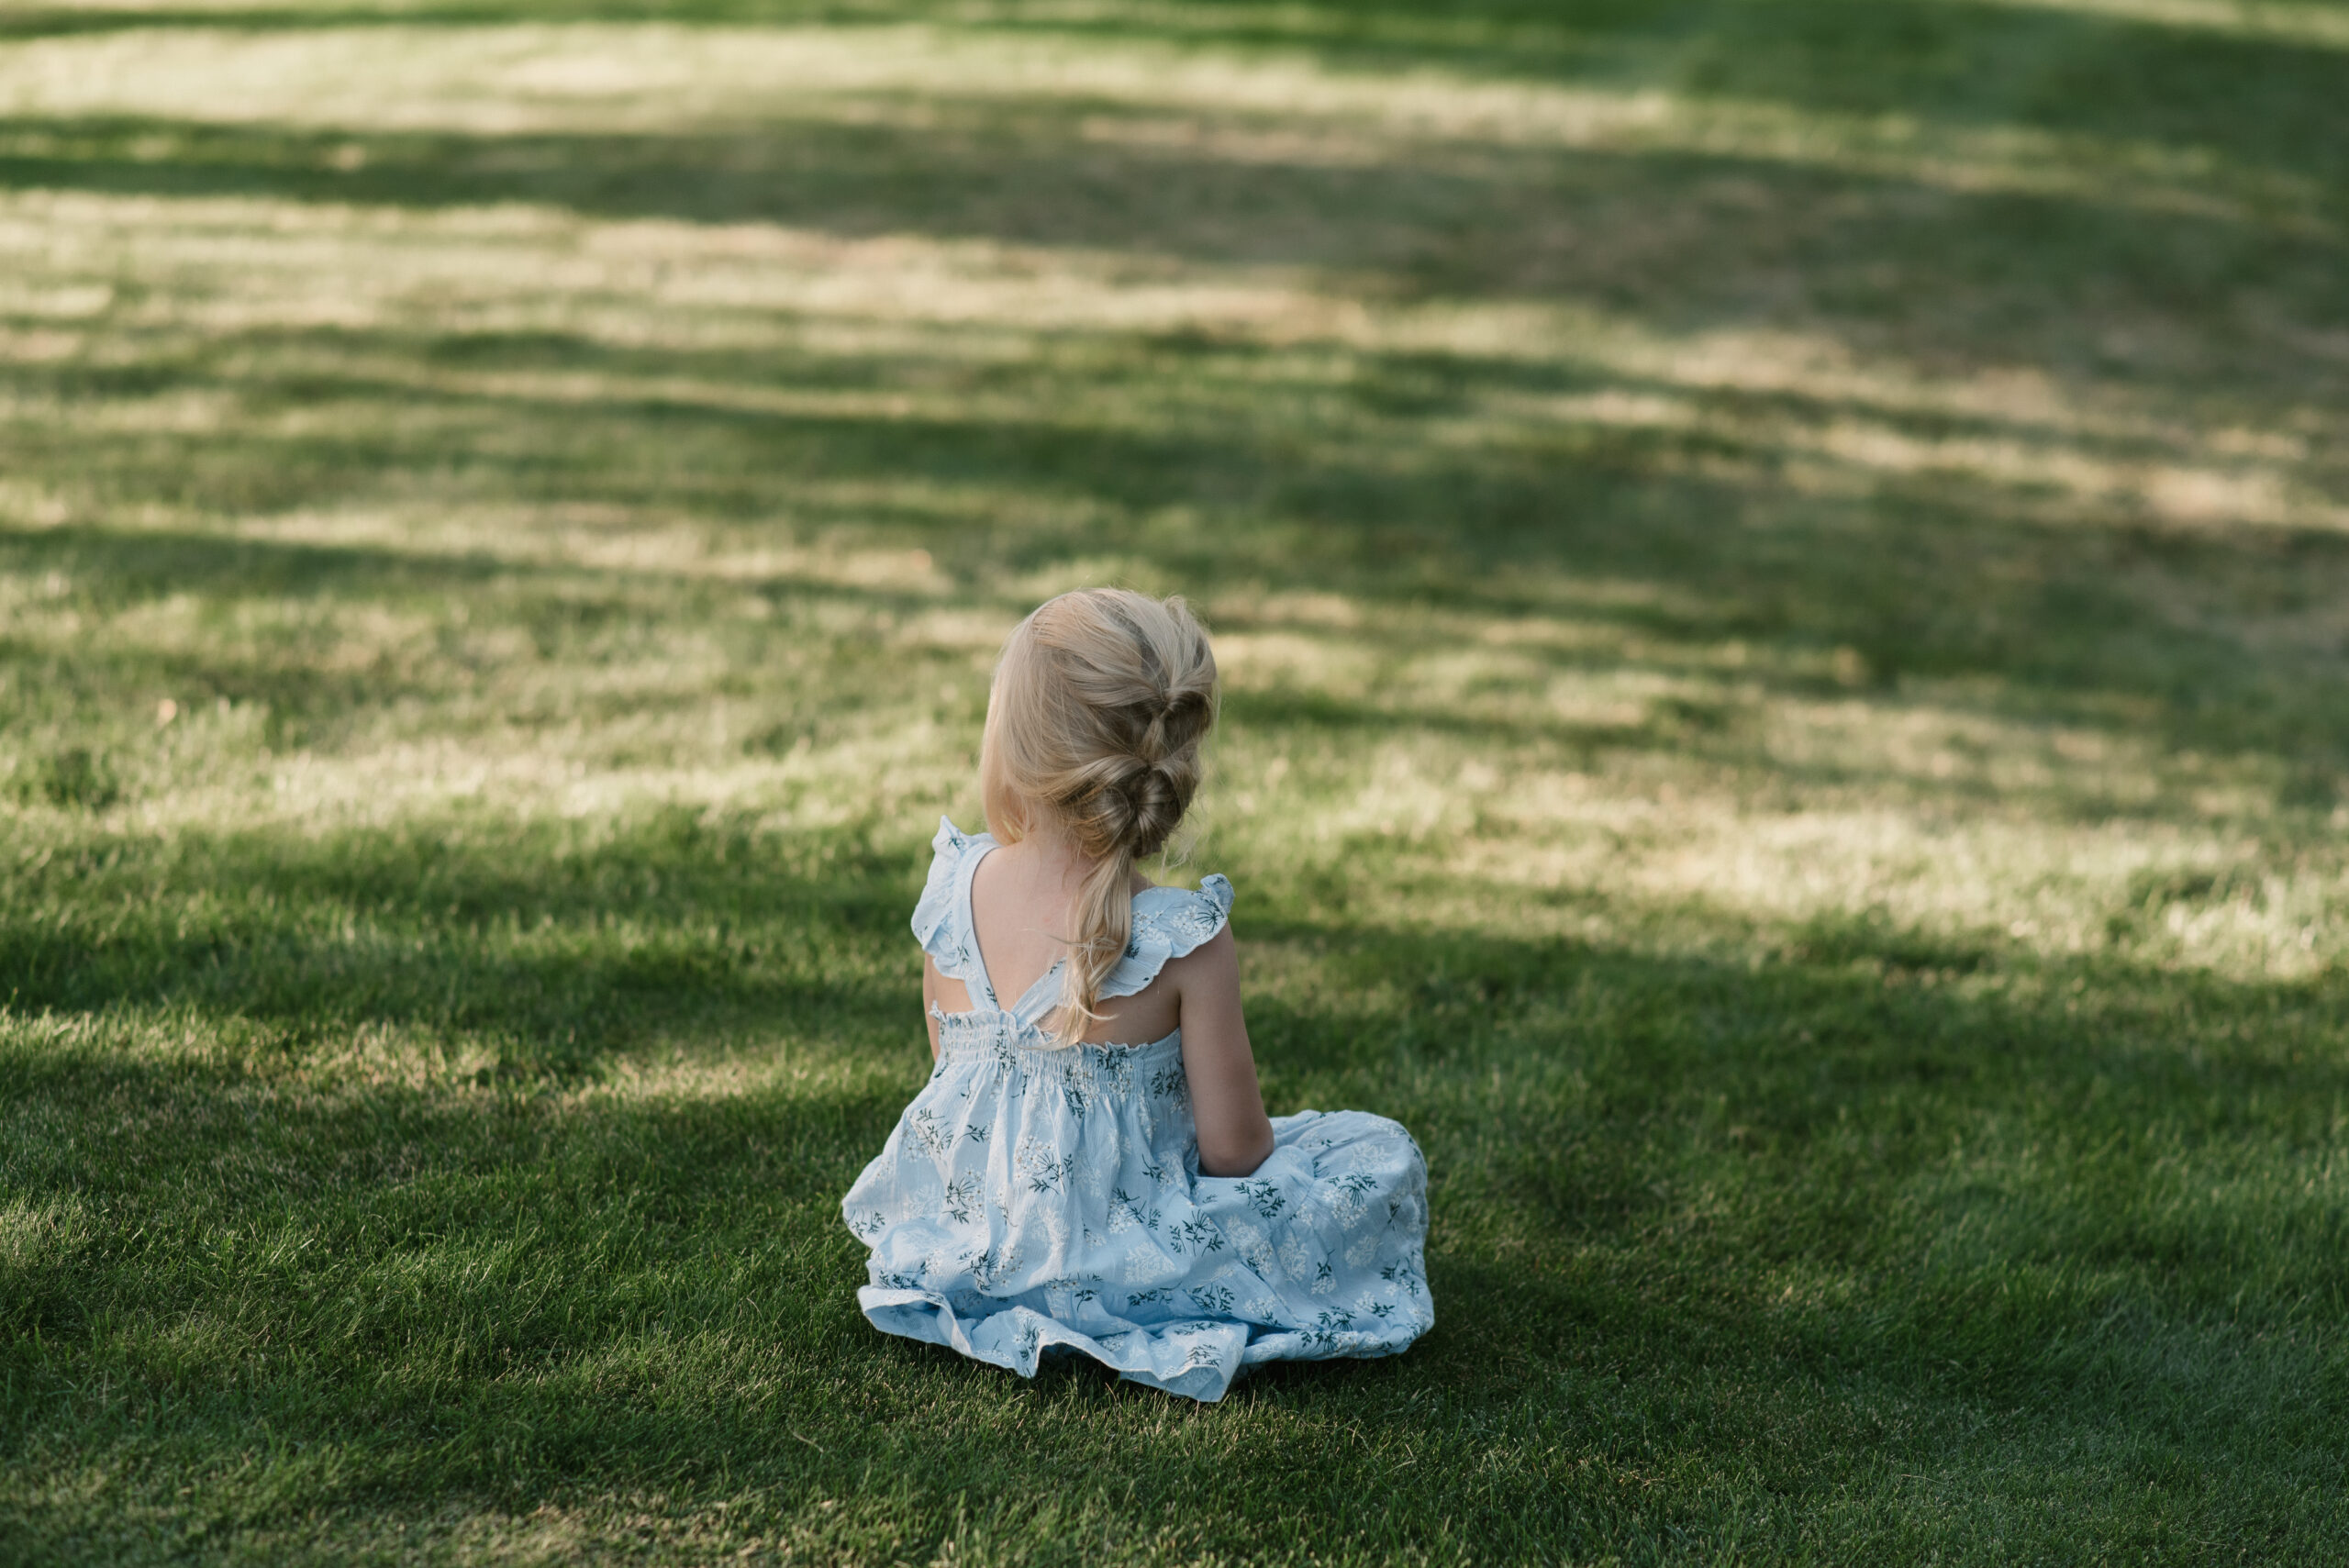 candid wedding photography of a little girl sitting in the grass